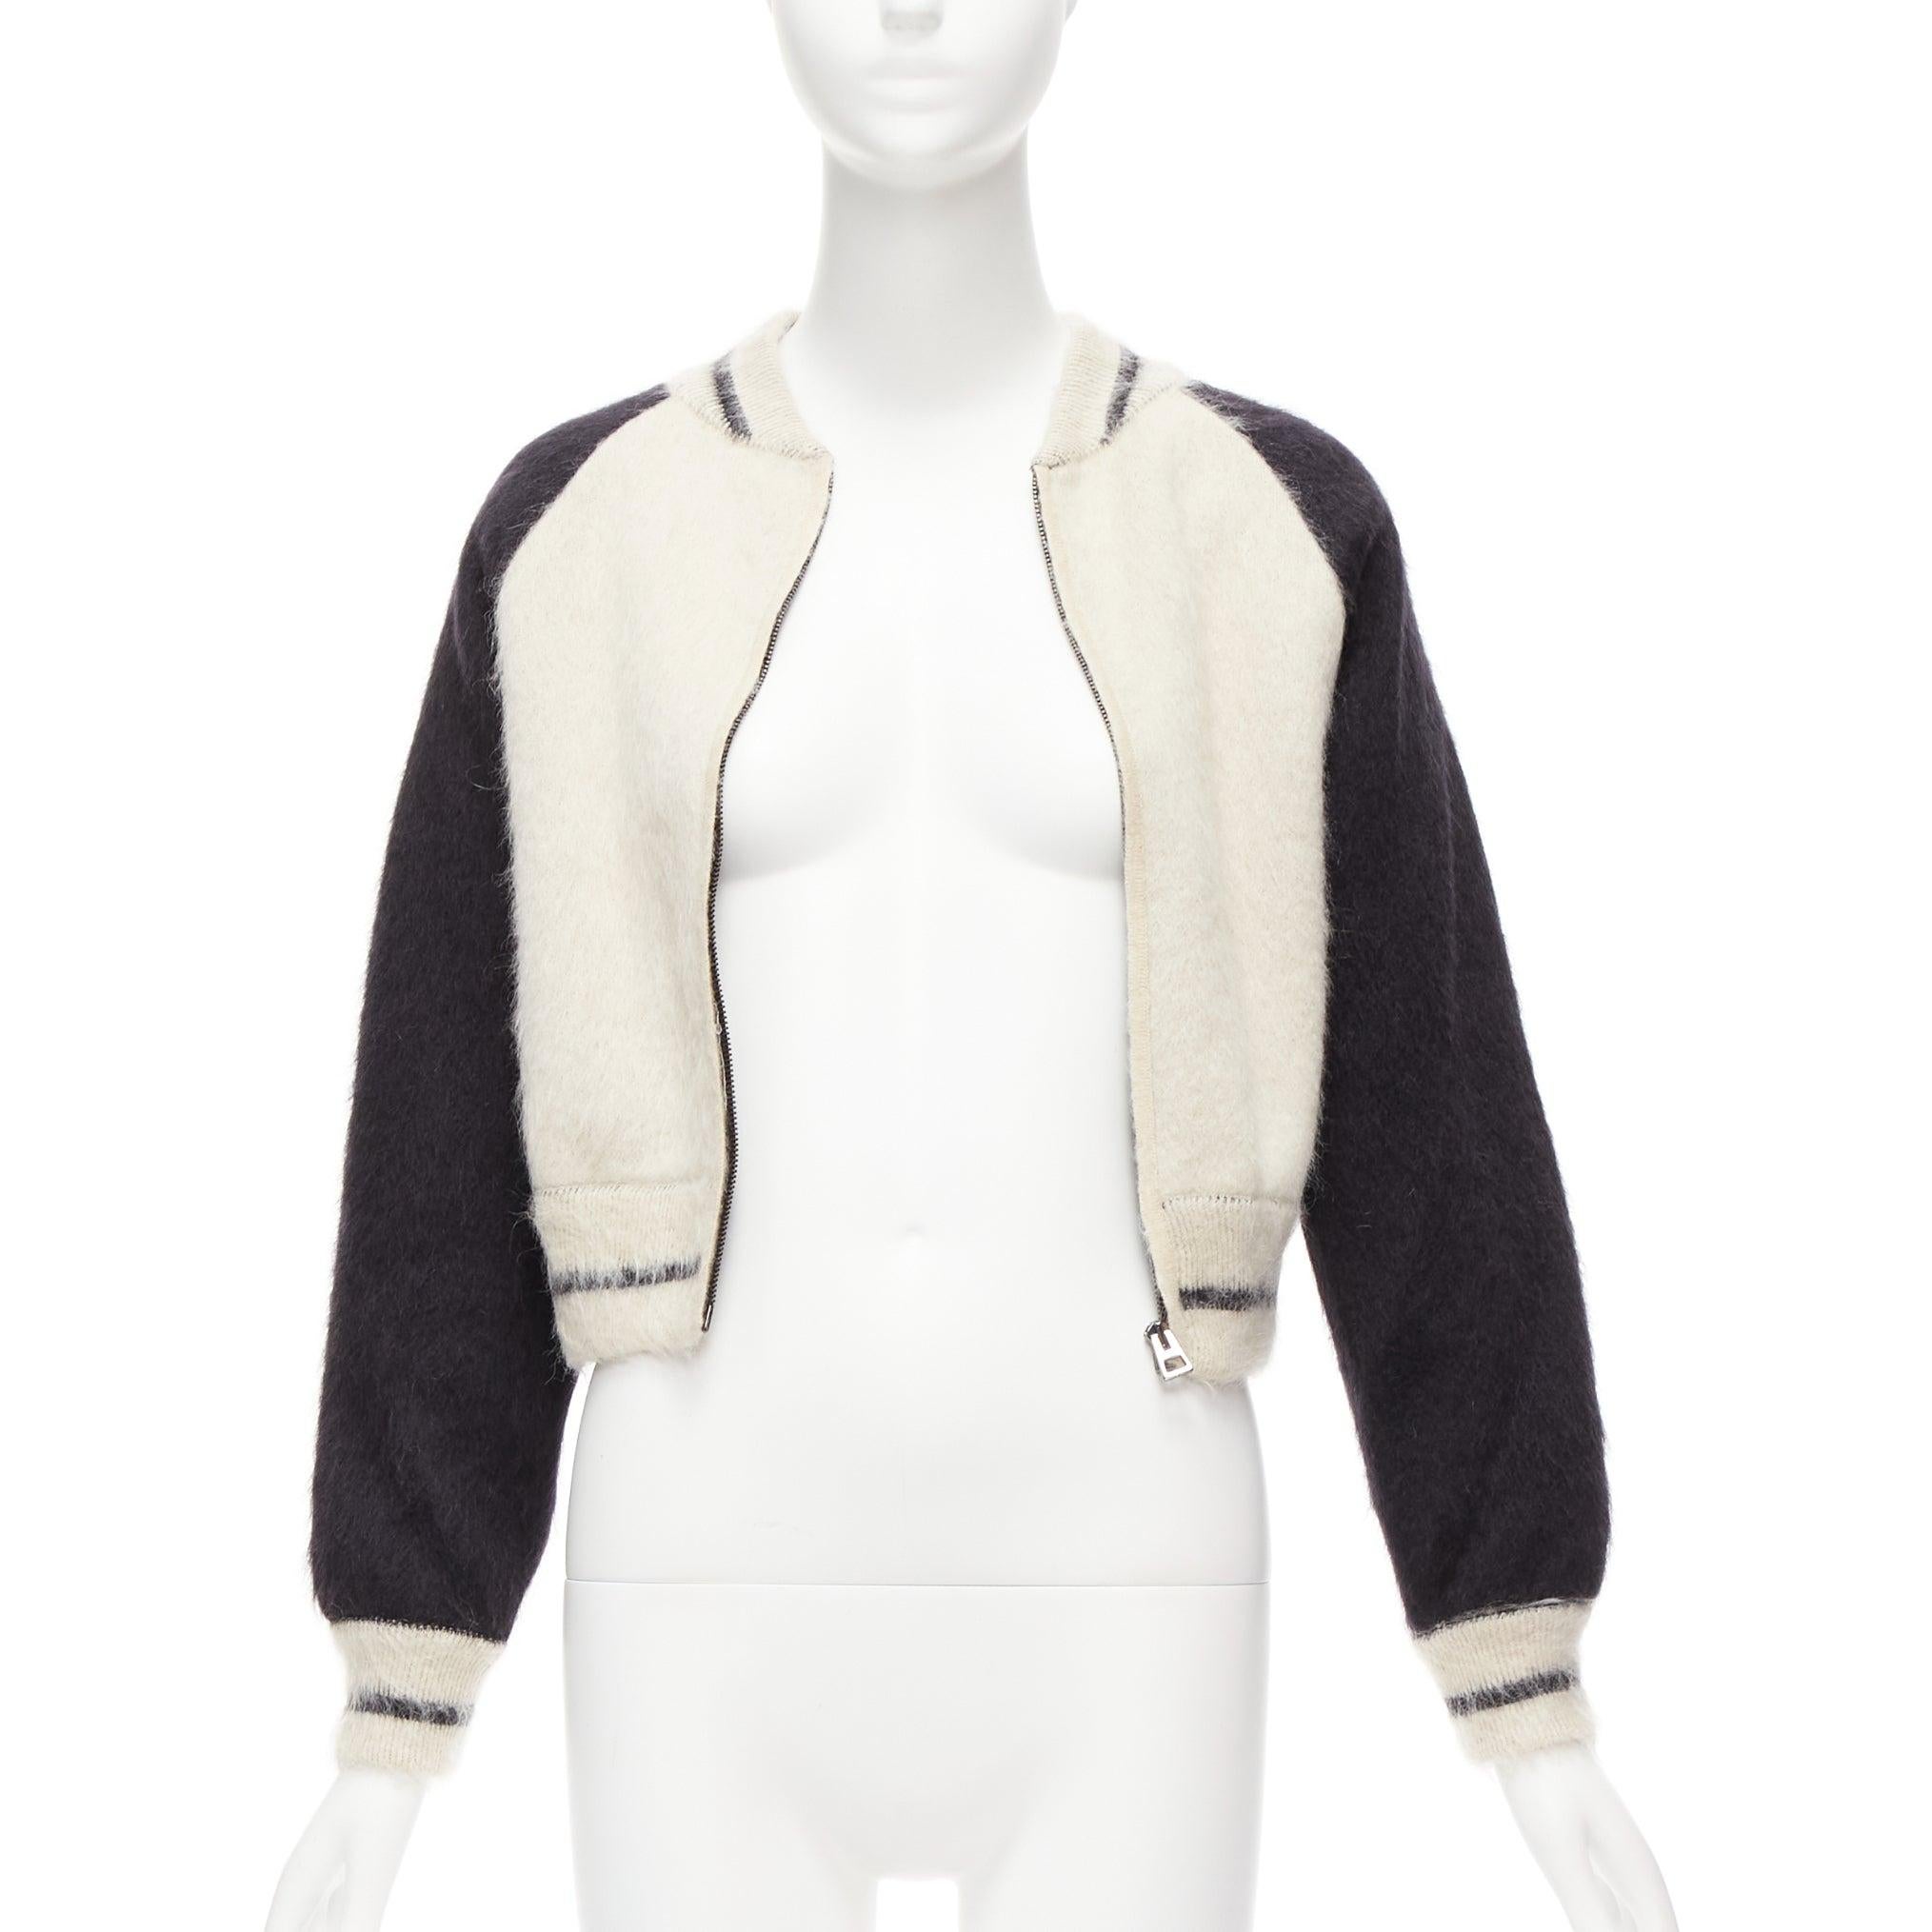 CHRISTIAN DIOR L'Union Fait la Force brushed mohair wool cropped bomber FR34 XXS
Reference: AAWC/A00618
Brand: Christian Dior
Designer: Maria Grazia Chiuri
Collection: L'Union Fait la Force
Material: Mohair, Blend
Color: Beige, Black
Pattern: